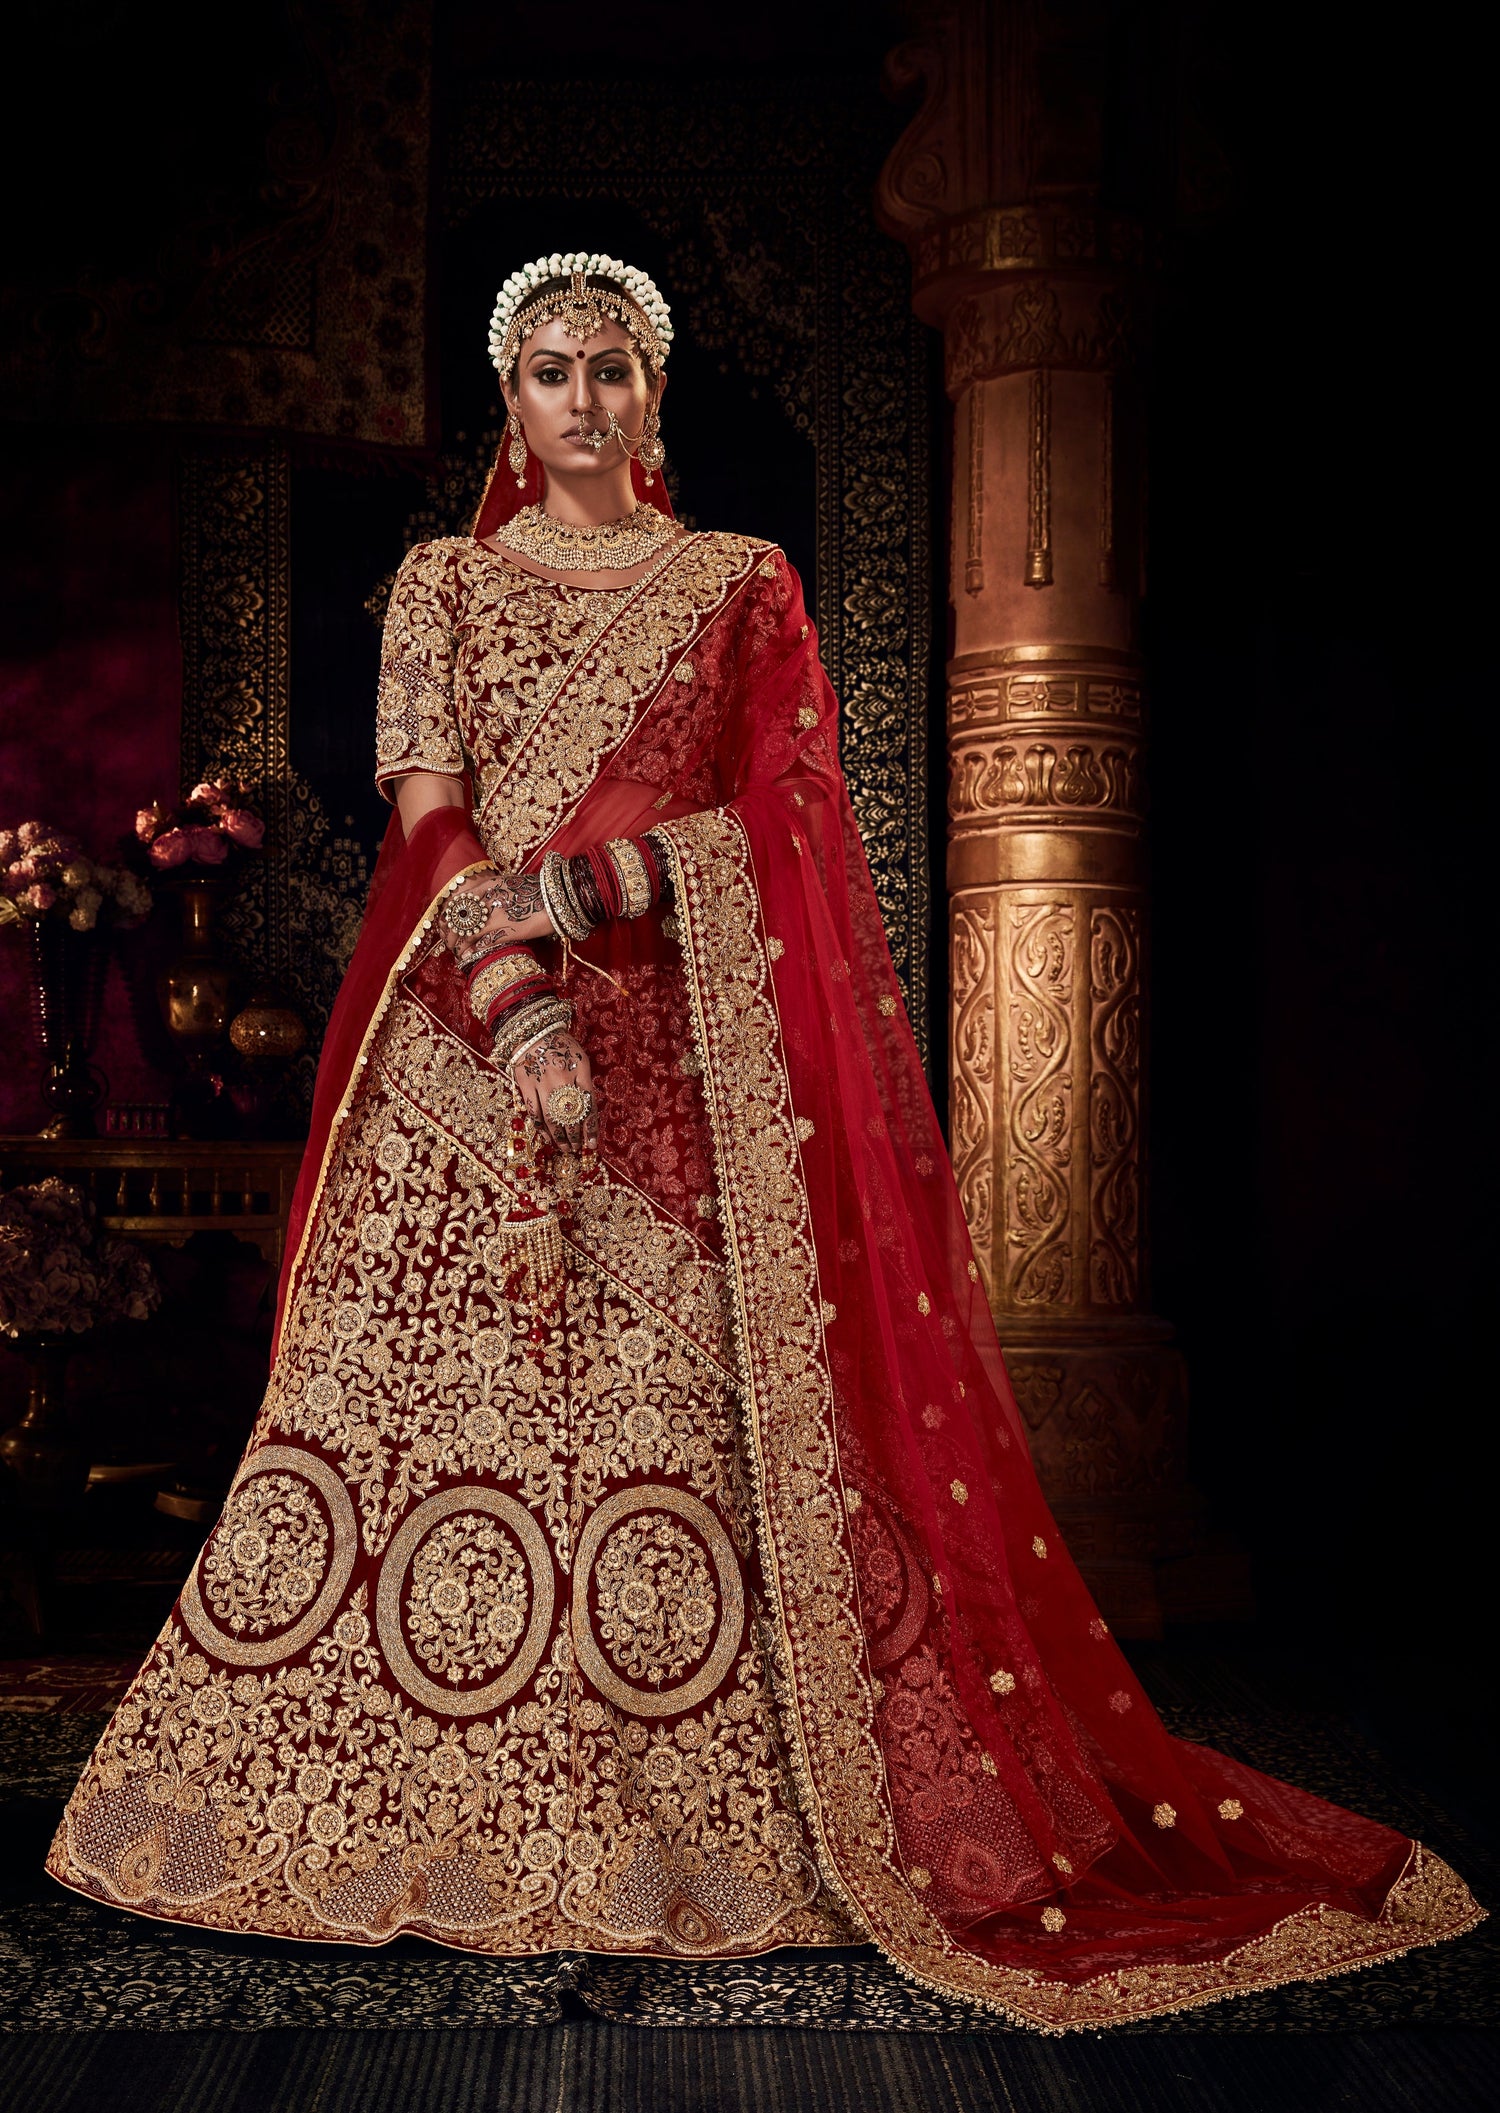 7 Unique Ivory Lehengas We Spotted On Real Brides | Sabyasachi lehenga  bridal, Sabyasachi bridal, Online wedding dress